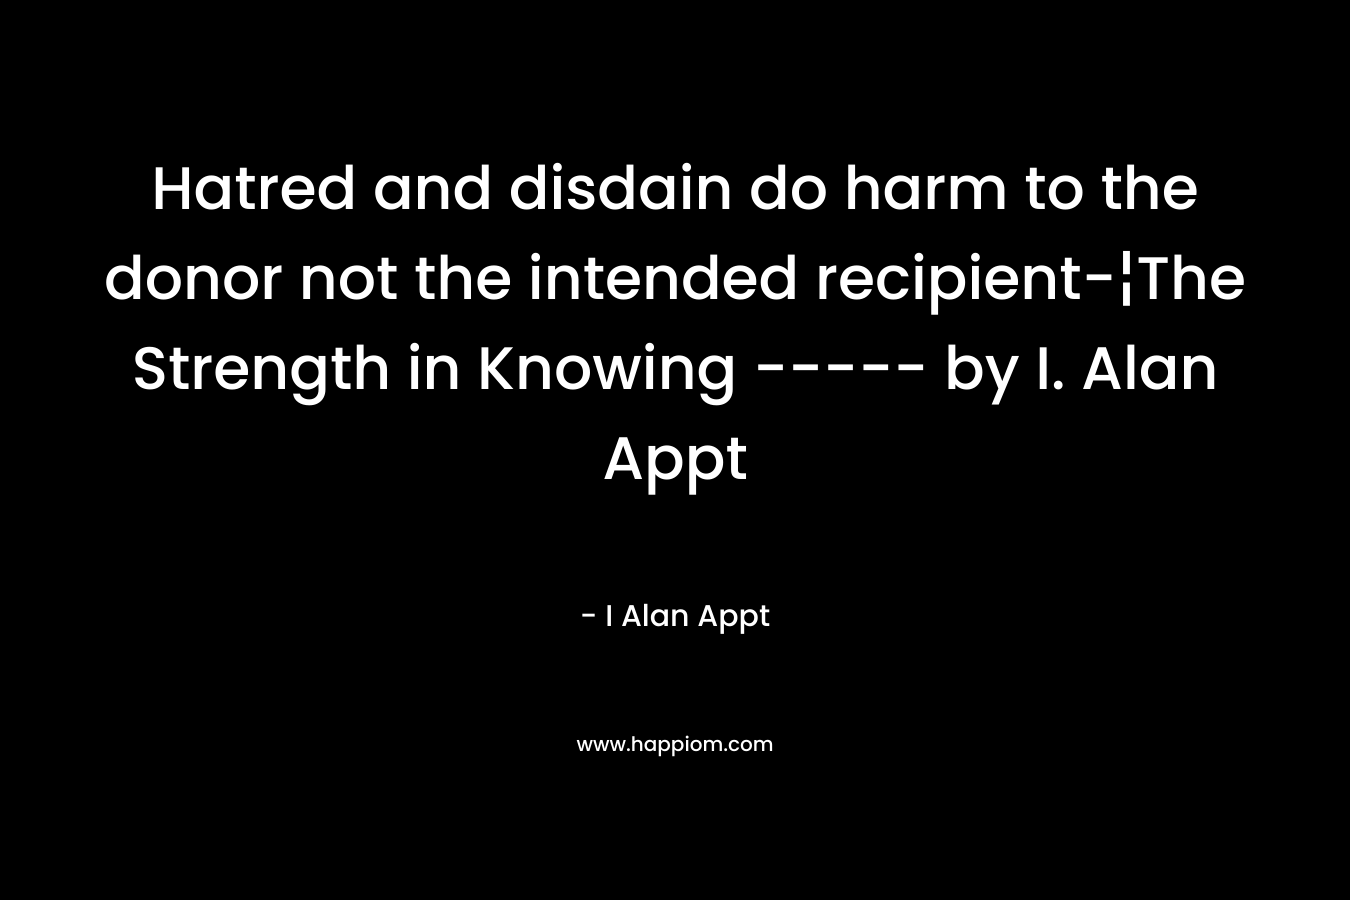 Hatred and disdain do harm to the donor not the intended recipient-¦The Strength in Knowing ----- by I. Alan Appt